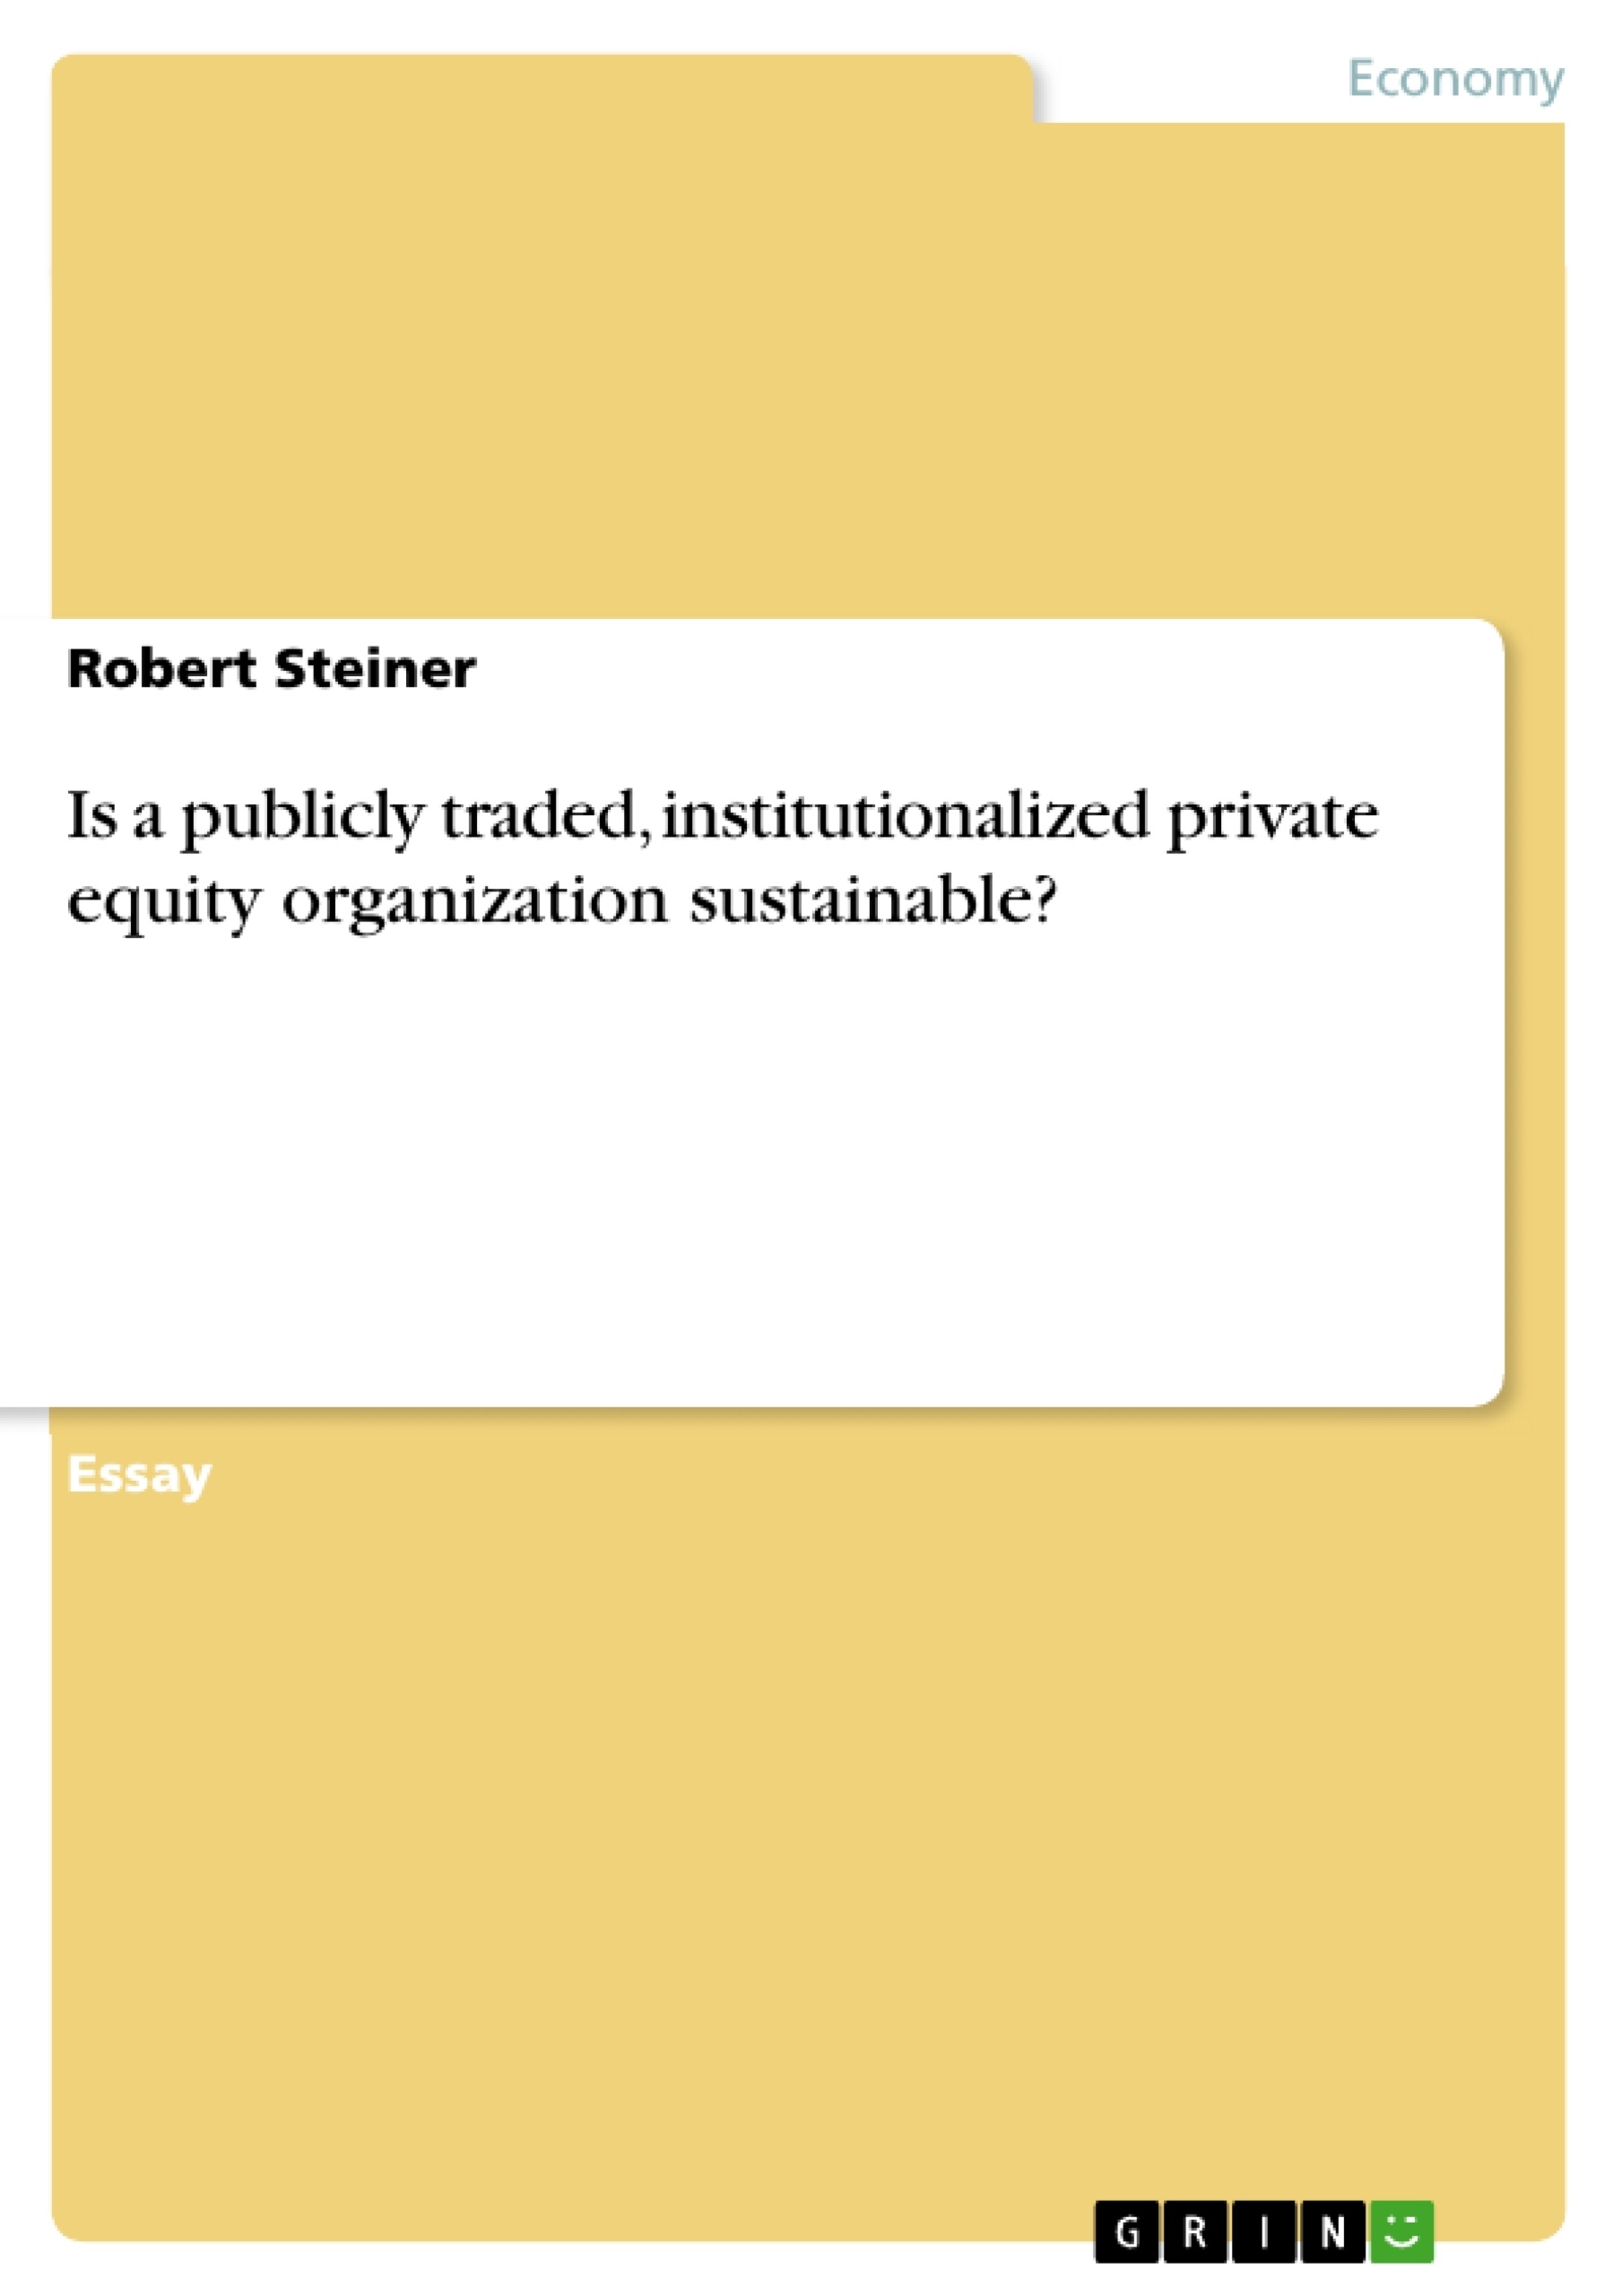 Title: Is a publicly traded, institutionalized private equity organization sustainable?